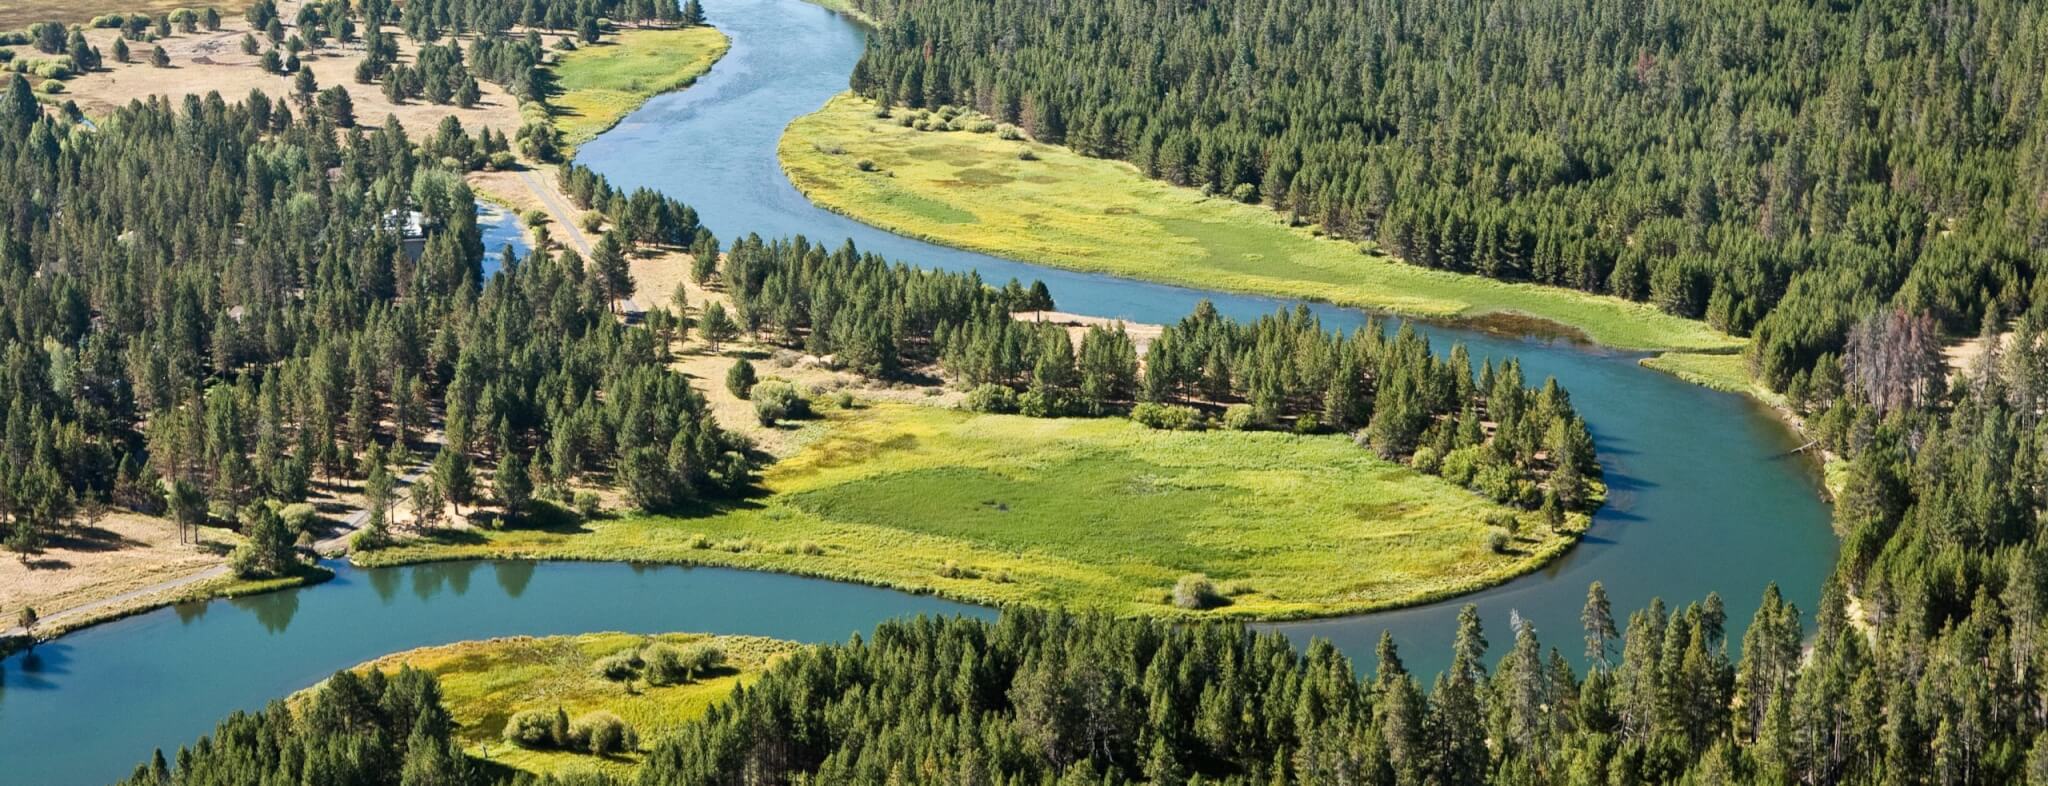 The Deschutes River seen from above flows in a sideways U shape through trees and grassy banks. 